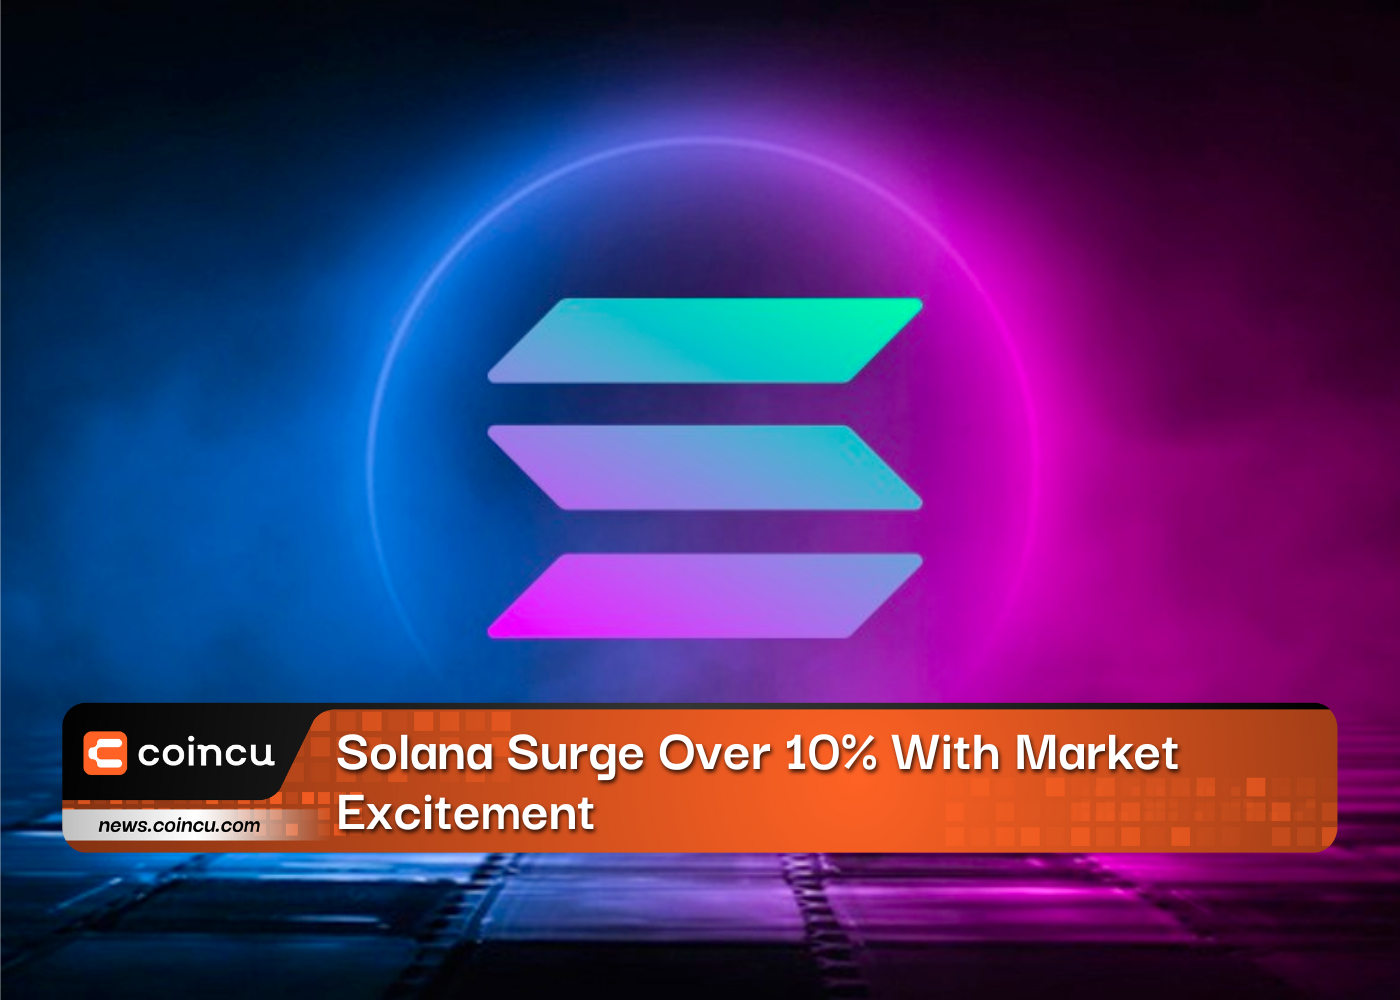 Solana Surge Over 10% With Market Excitement